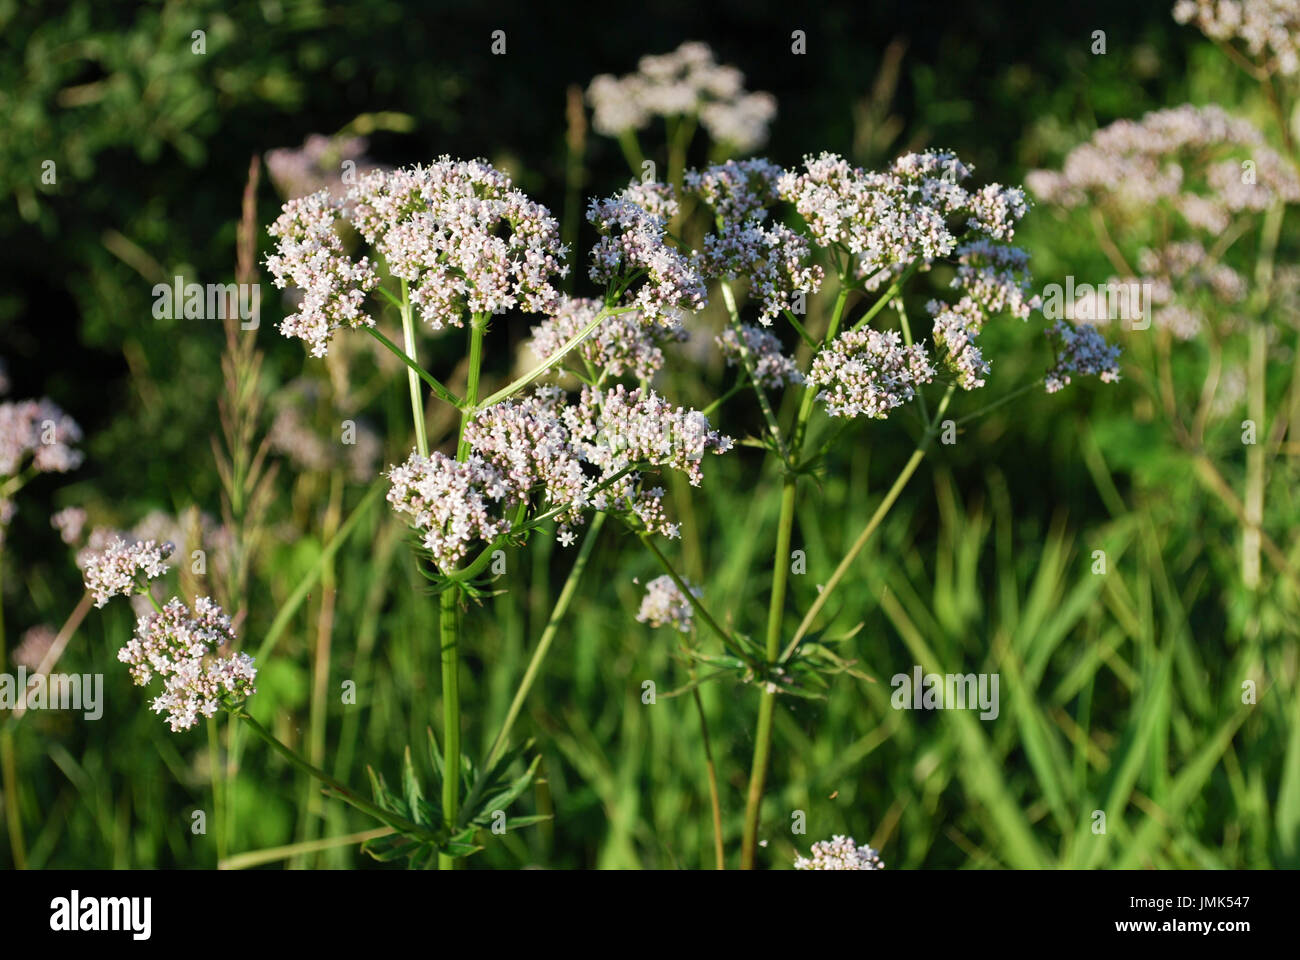 White wildflowers of Anise (Pimpinella anisum), also called aniseed, is a flowering plant in the family Apiaceae. Stock Photo